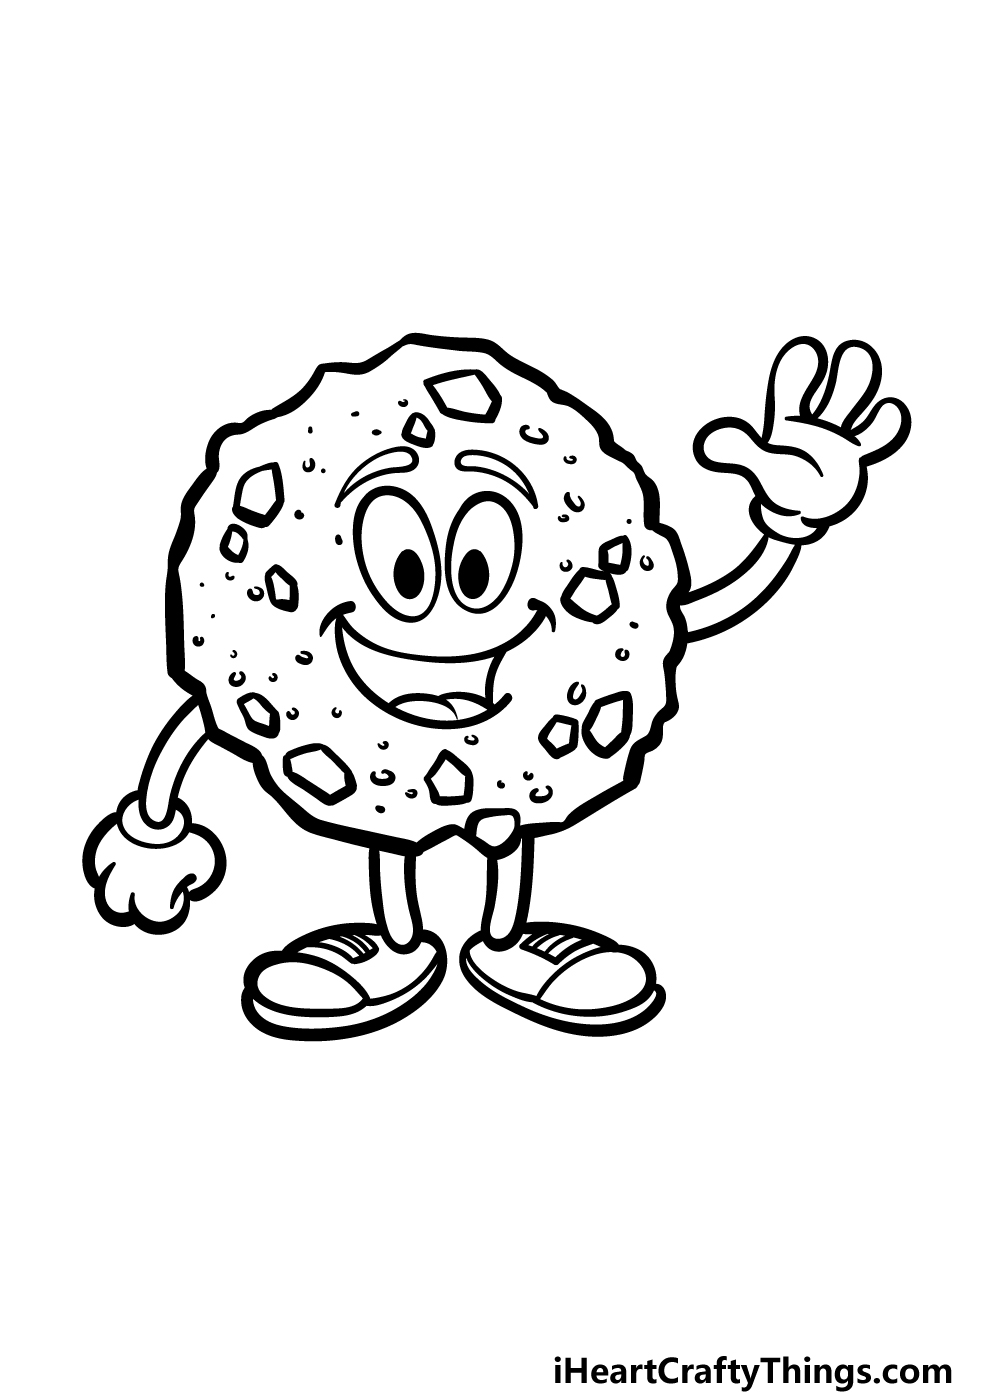 Cartoon Cookie Drawing - How To Draw A Cartoon Cookie Step By Step